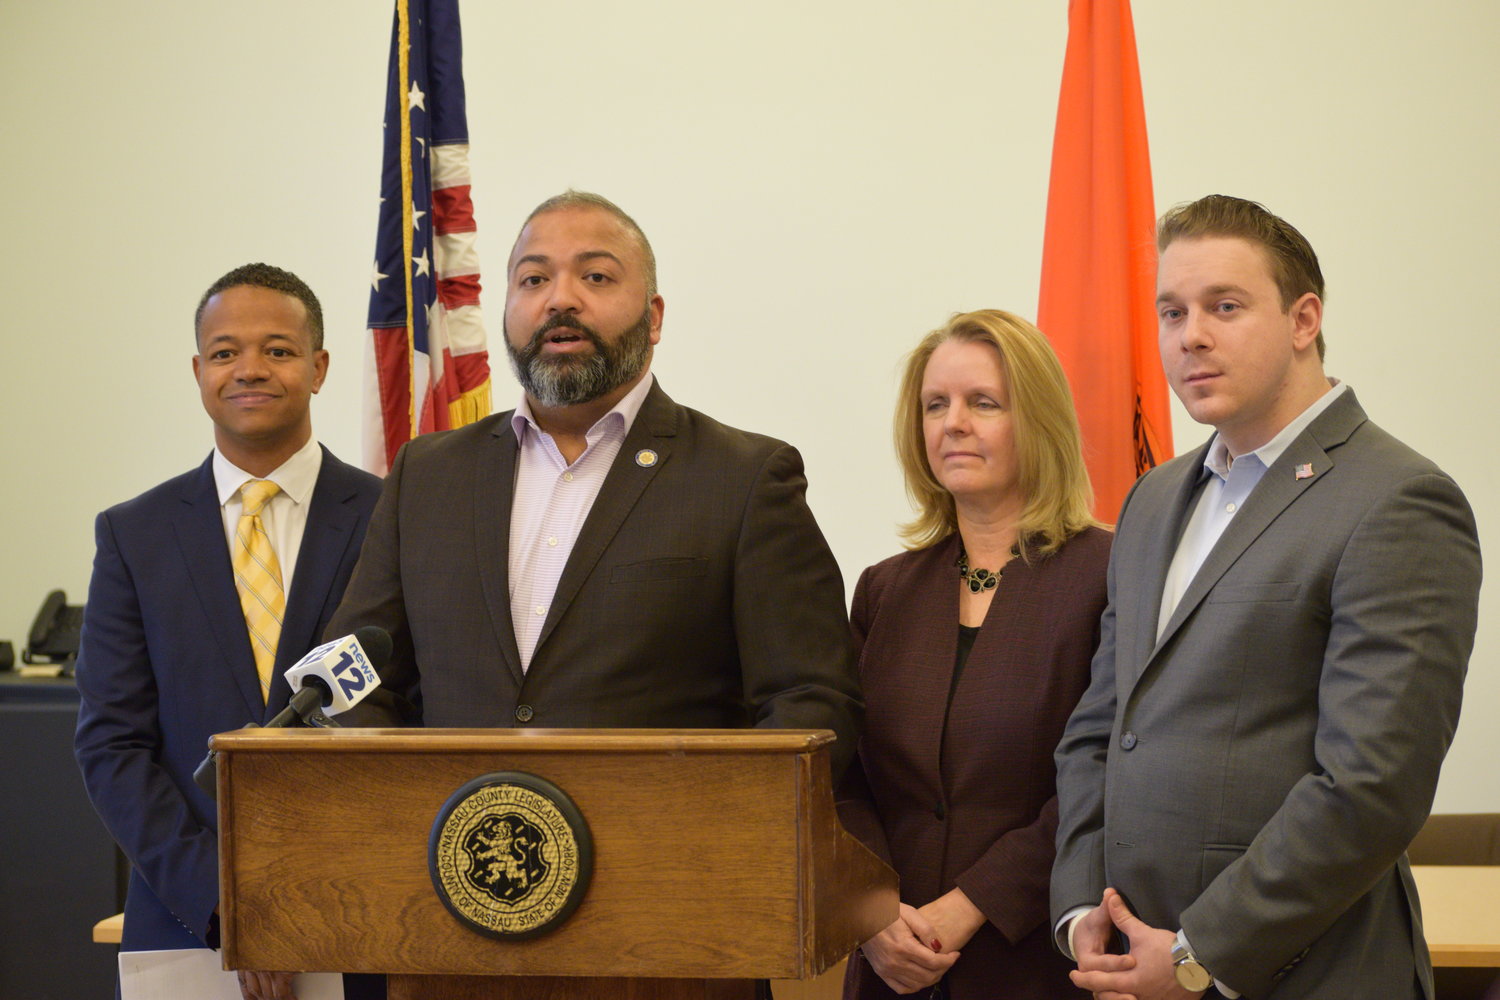 State Sen. Kevin Thomas, second from left, was joined by Nassau County Legislators Carrié Solages, far left, Debra Mulé and Joshua Lafazan at a news conference to discuss the county’s freezing of property tax assessments for a third consecutive year. County Executive Bruce Blakeman had pledged to fix the entire system of assessments while campaigning against Laura Curran.